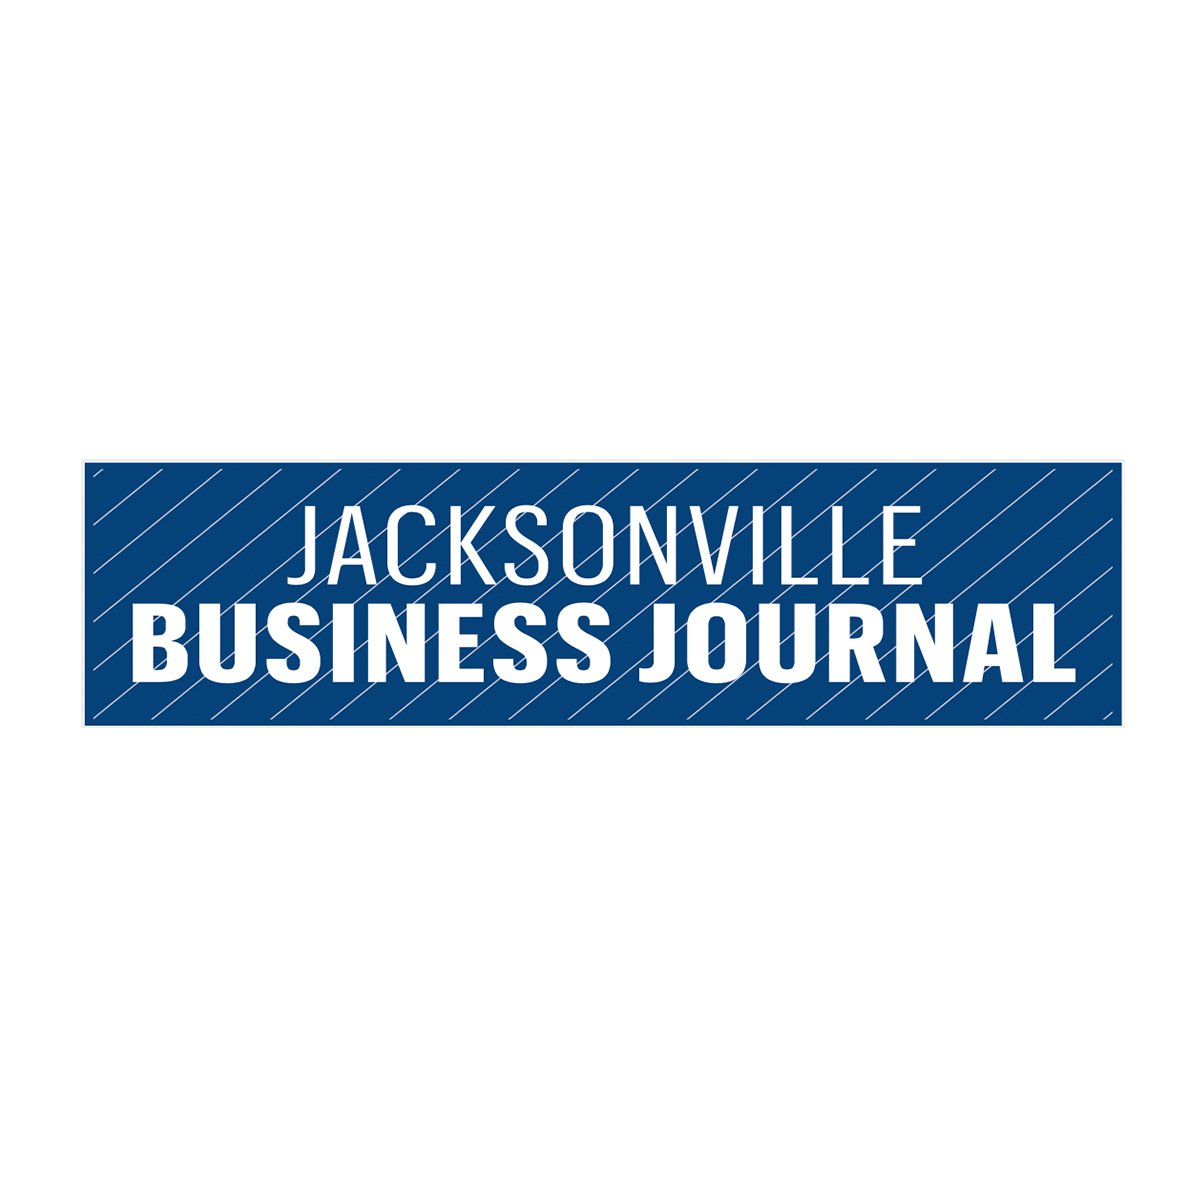 Jacksonville whiskey entrepreneur signs supplier deal with Sam’s Club